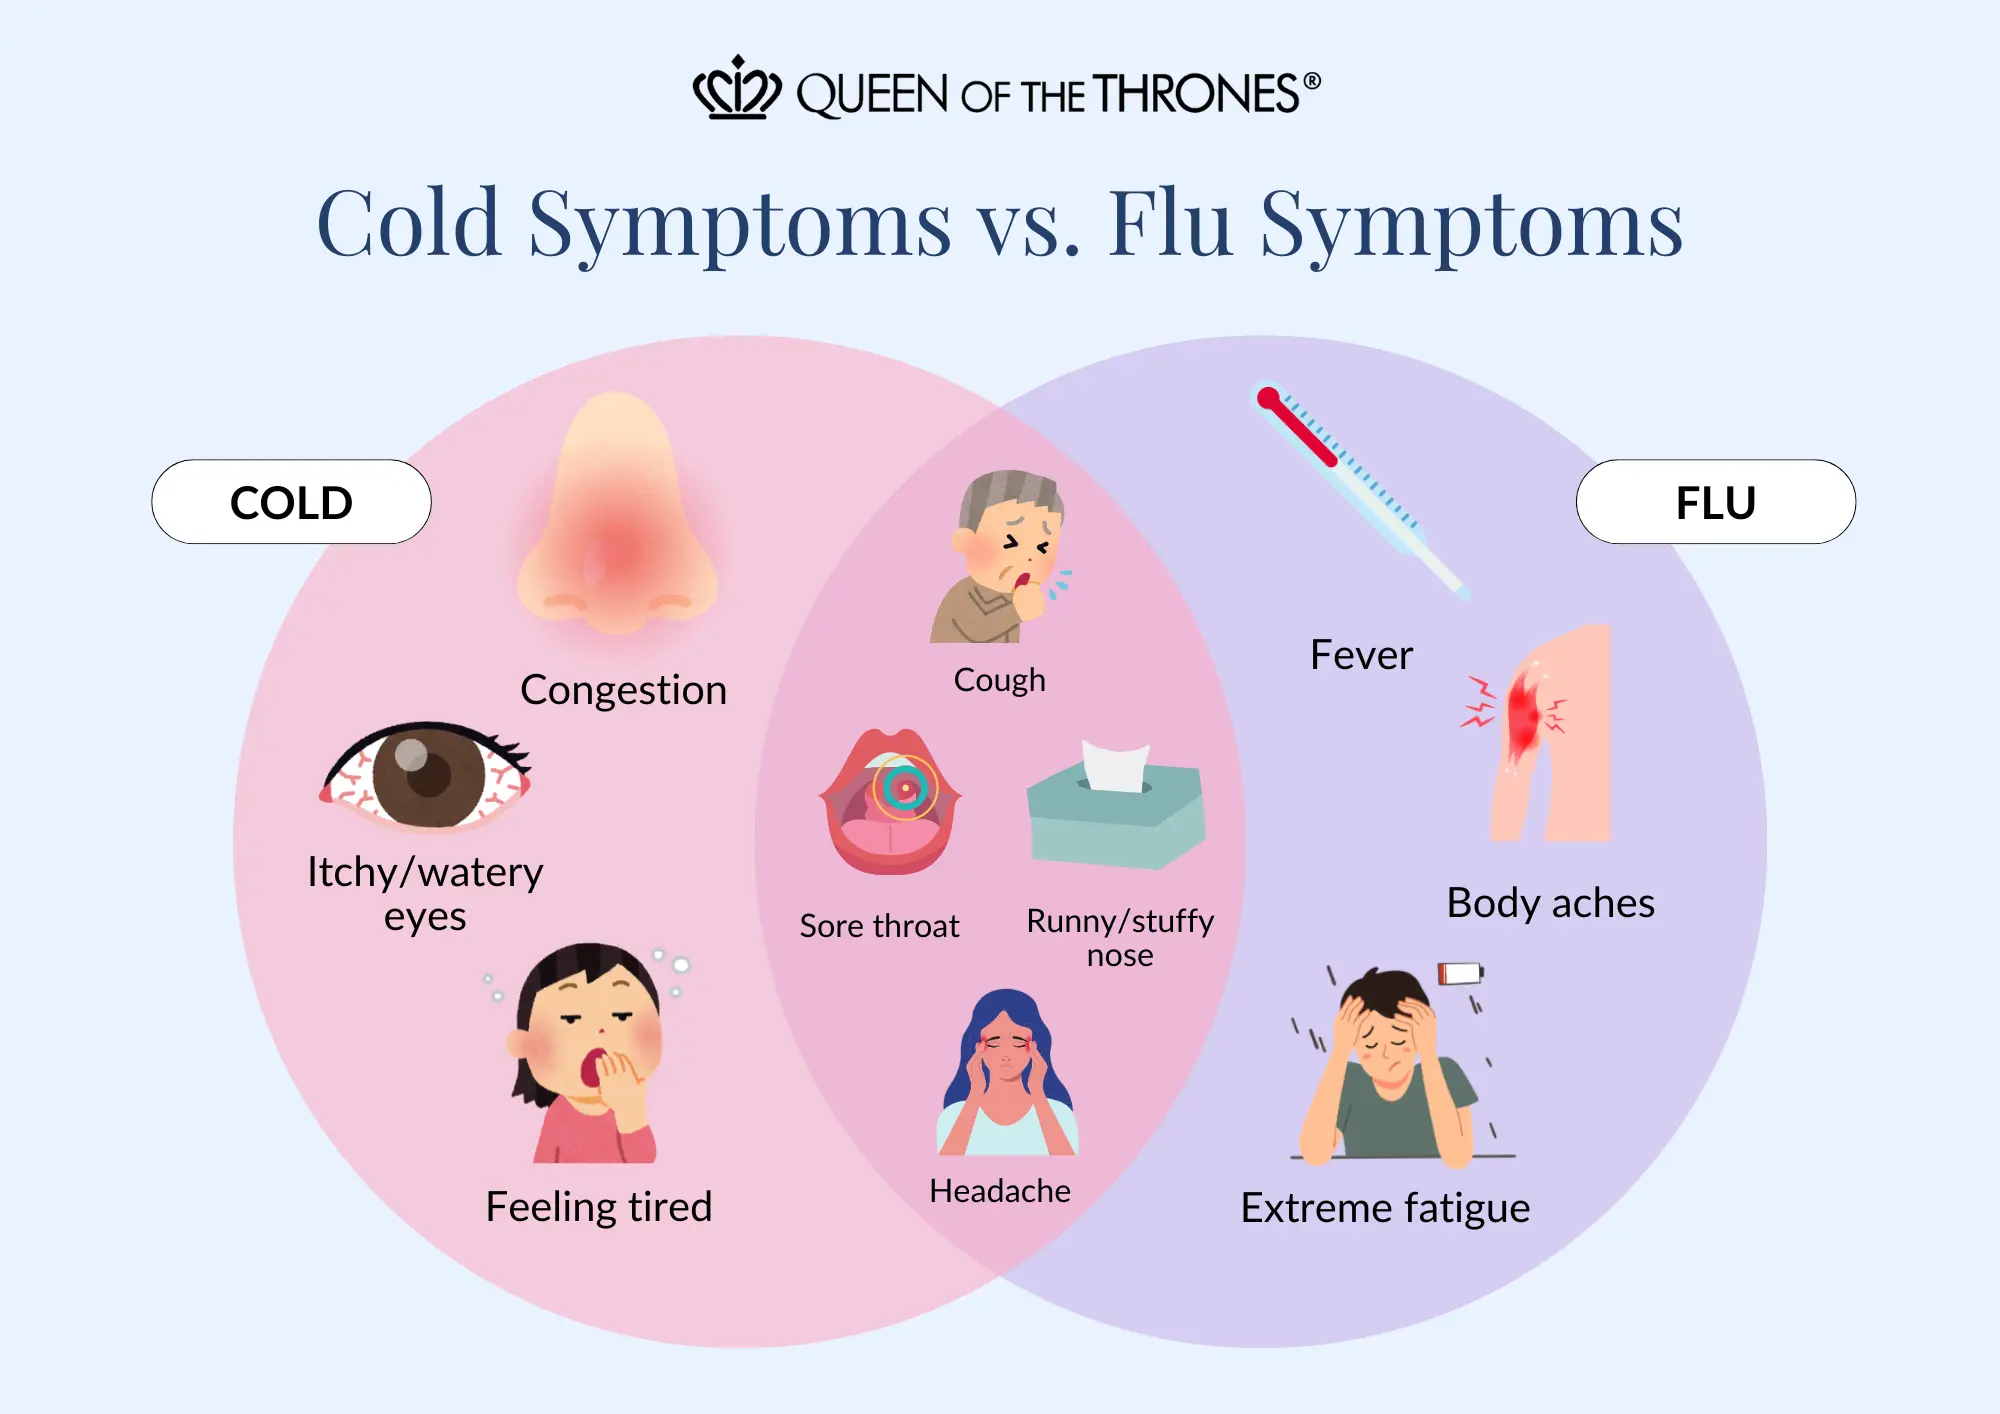 Comparison between cold and flu symptoms by Queen of the Thrones